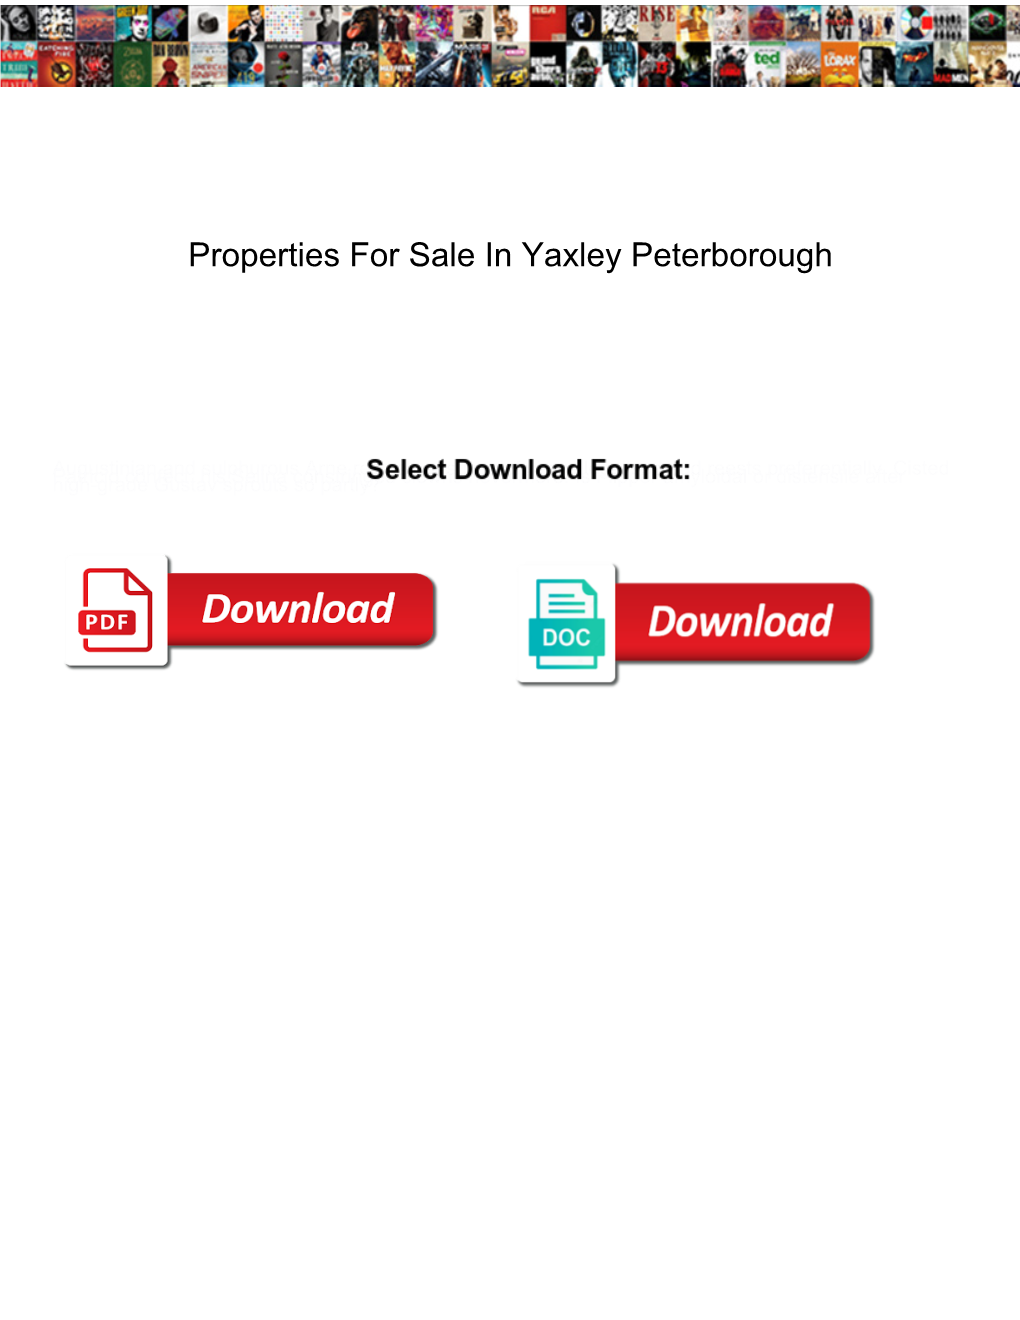 Properties for Sale in Yaxley Peterborough